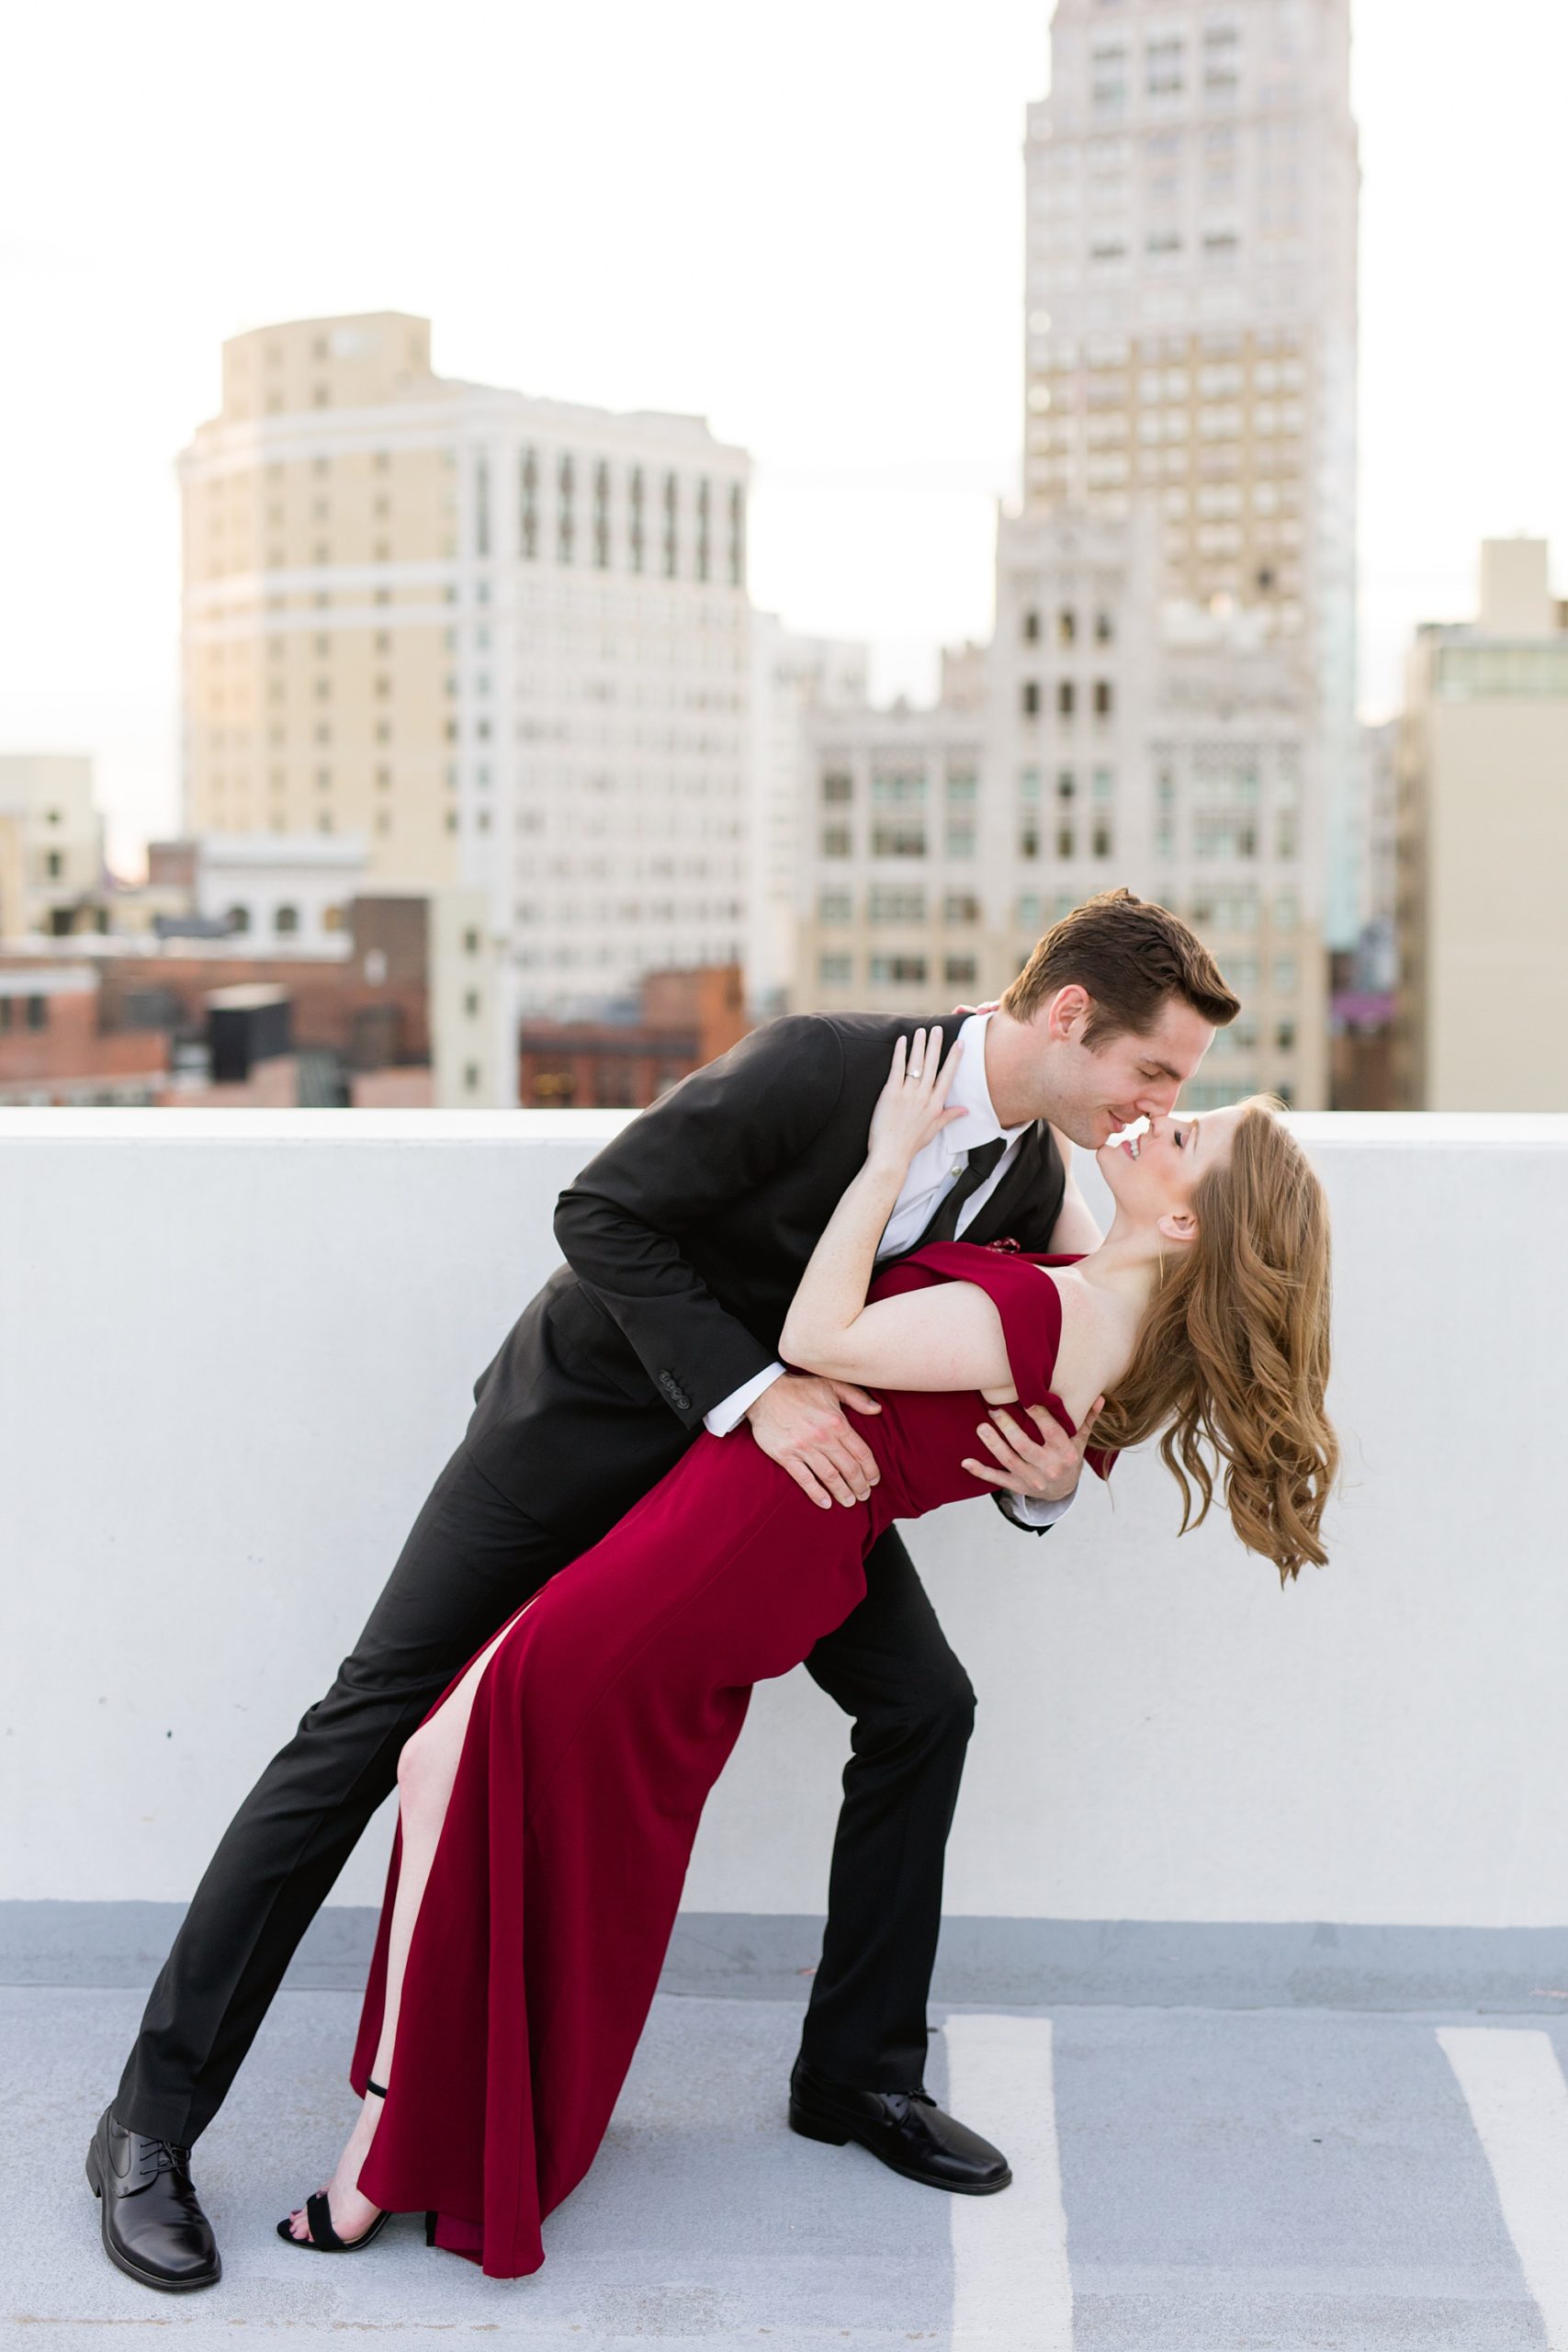 Dip and kiss photo on a rooftop | Detroit | Breanne Rochelle Photography